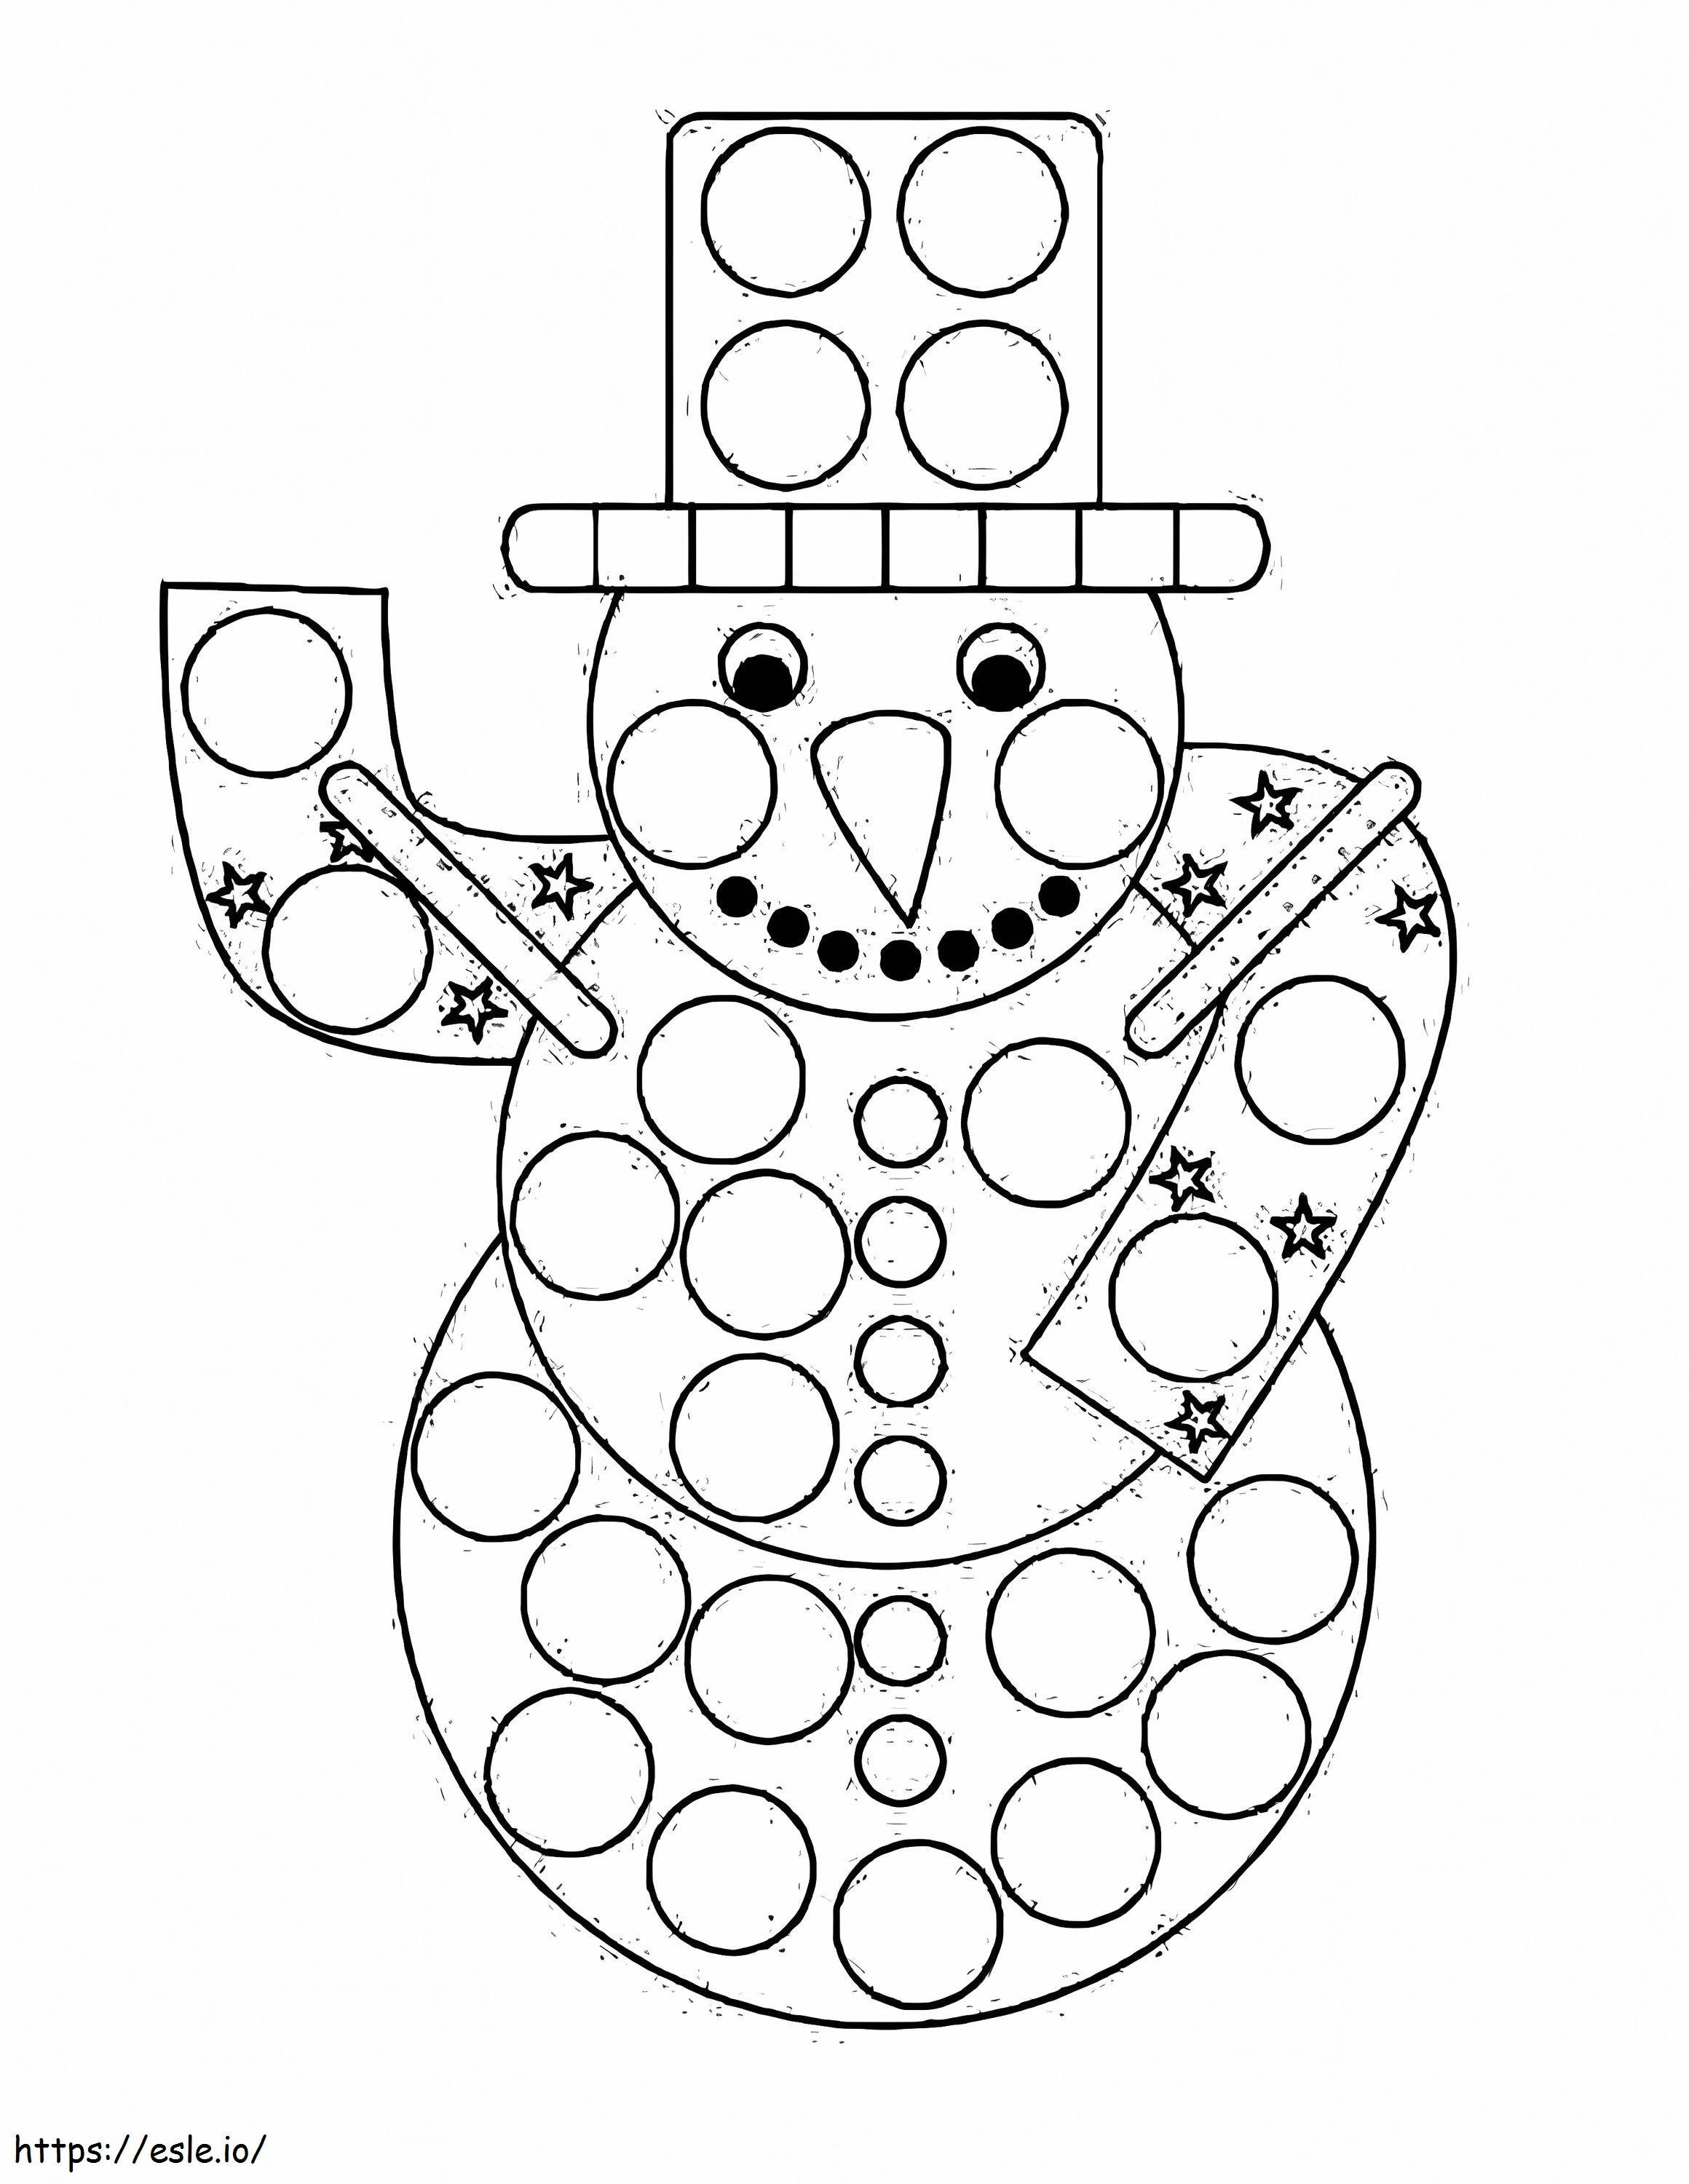 Snowman Dot Marker coloring page